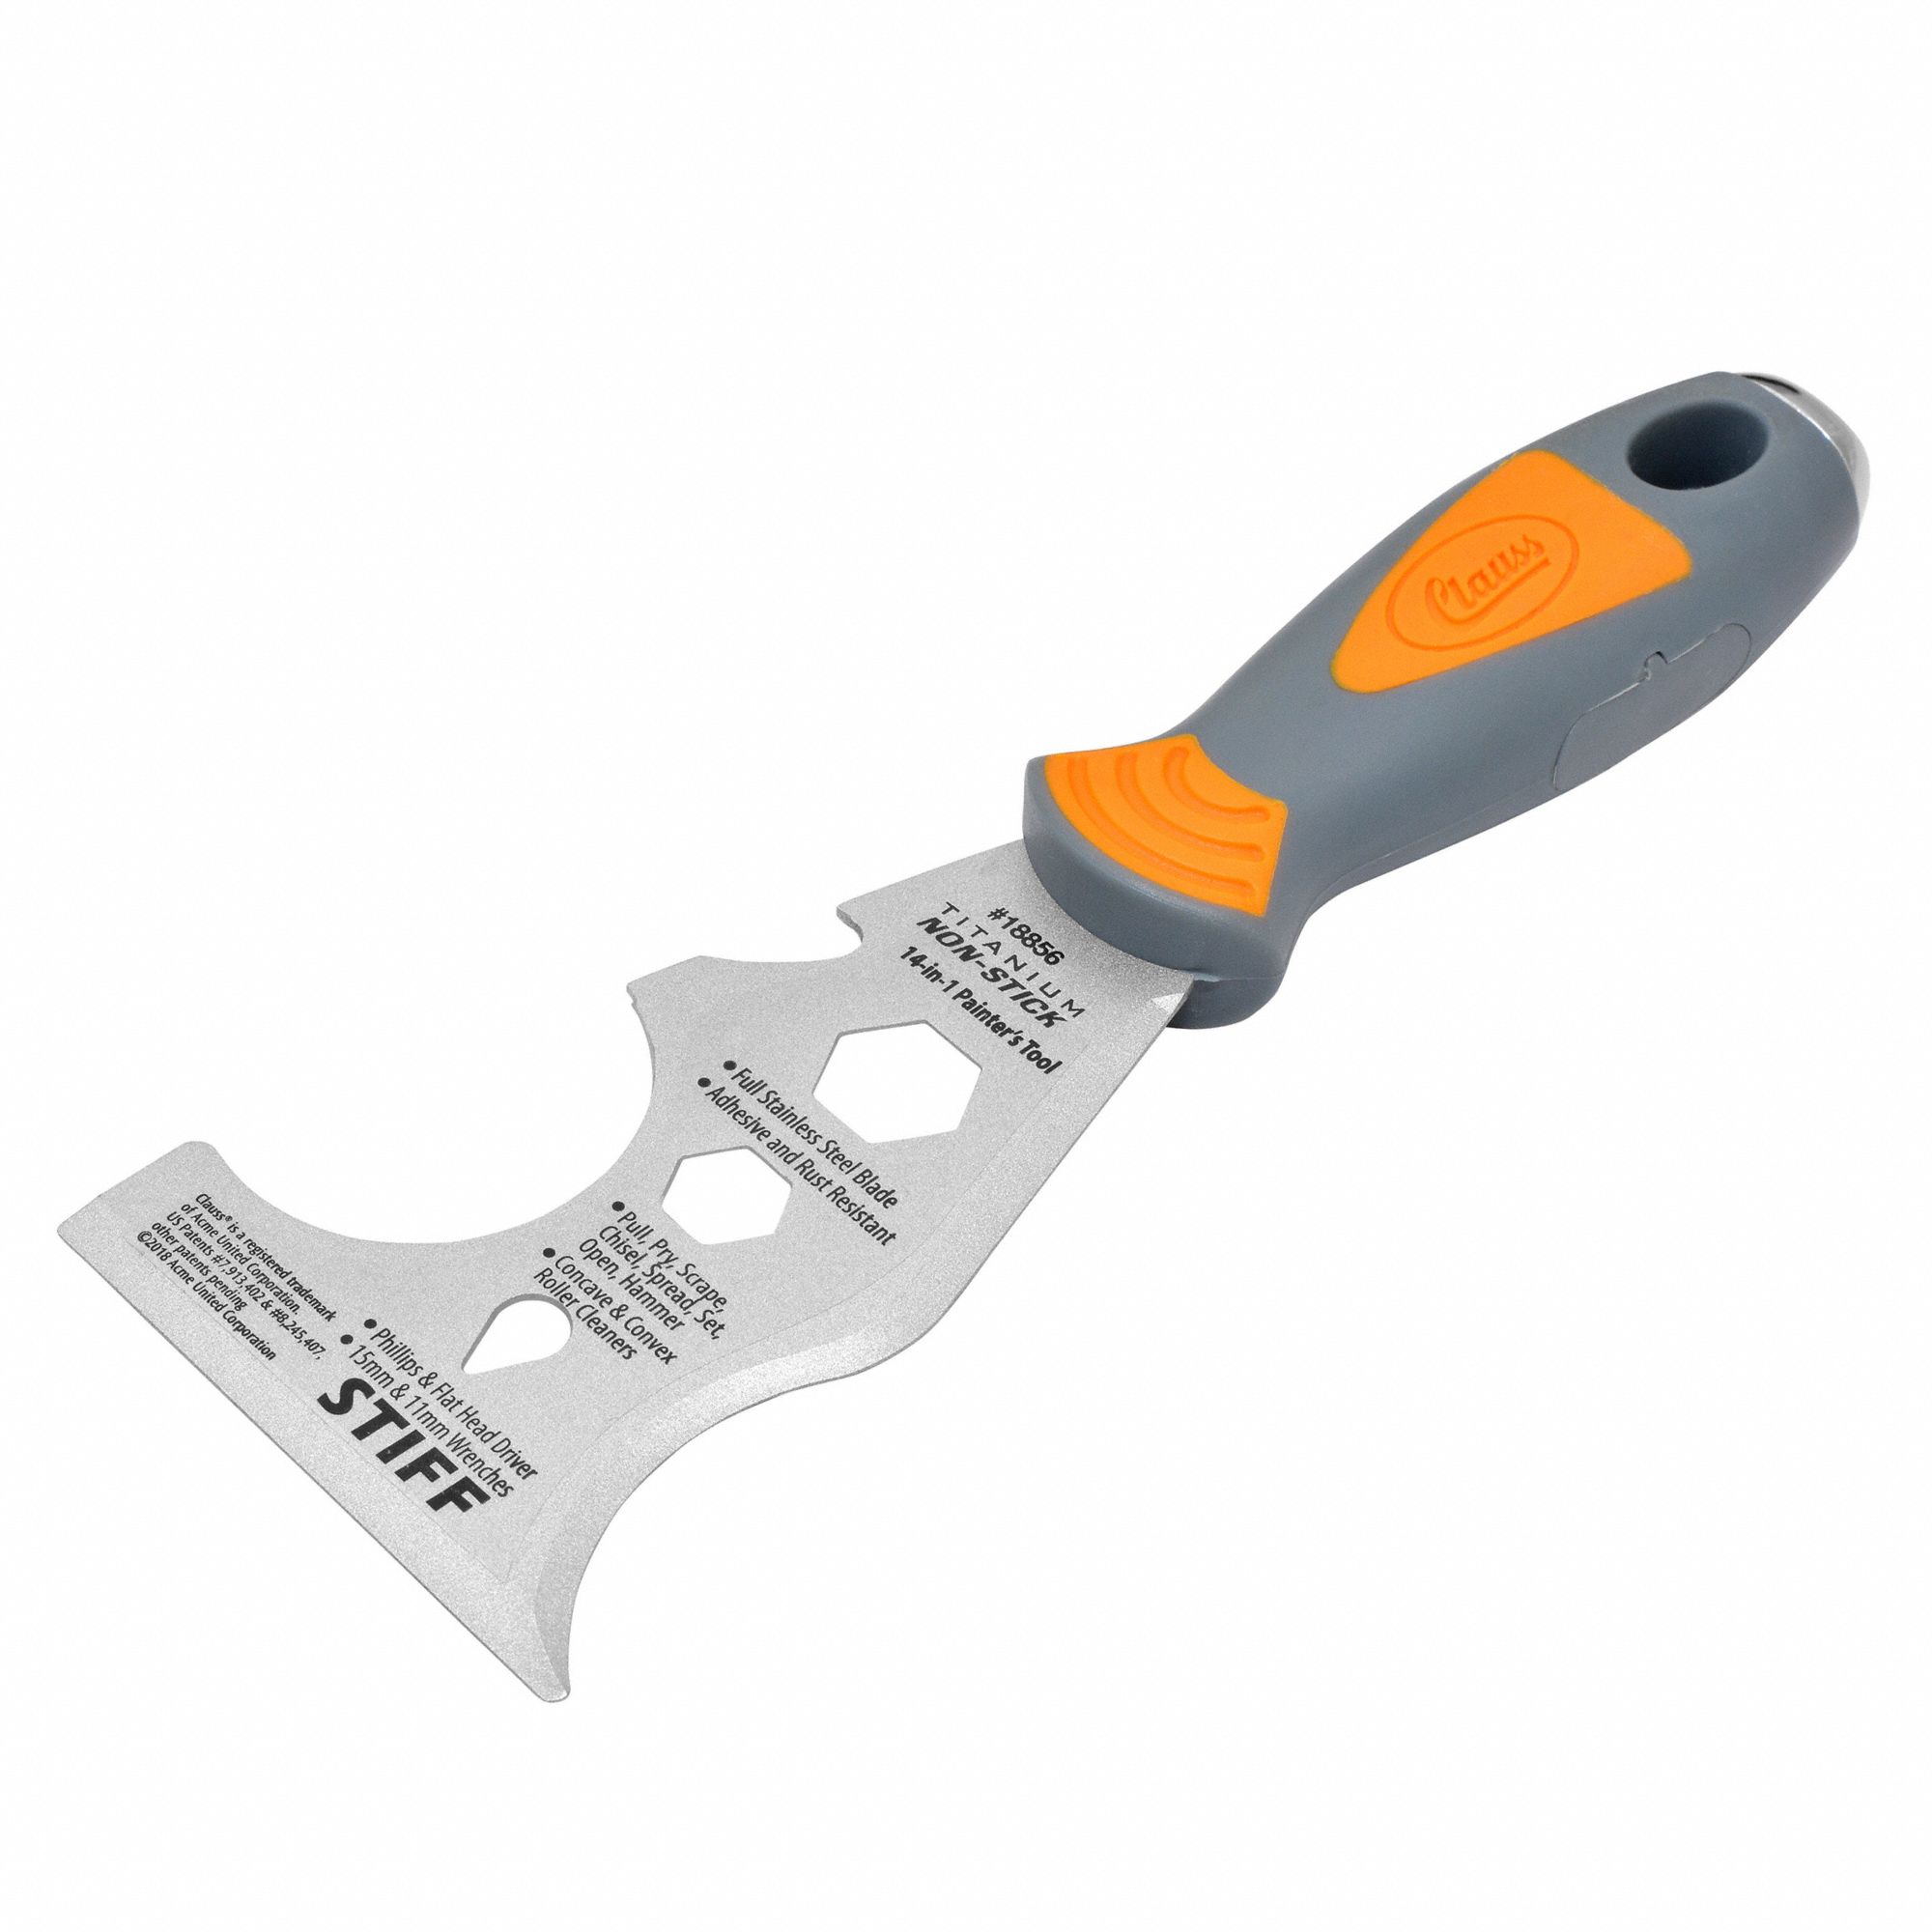 Clauss 18856 14-in-1 Titanium Non-Stick Painter's Tool with Philip's and Driver, 